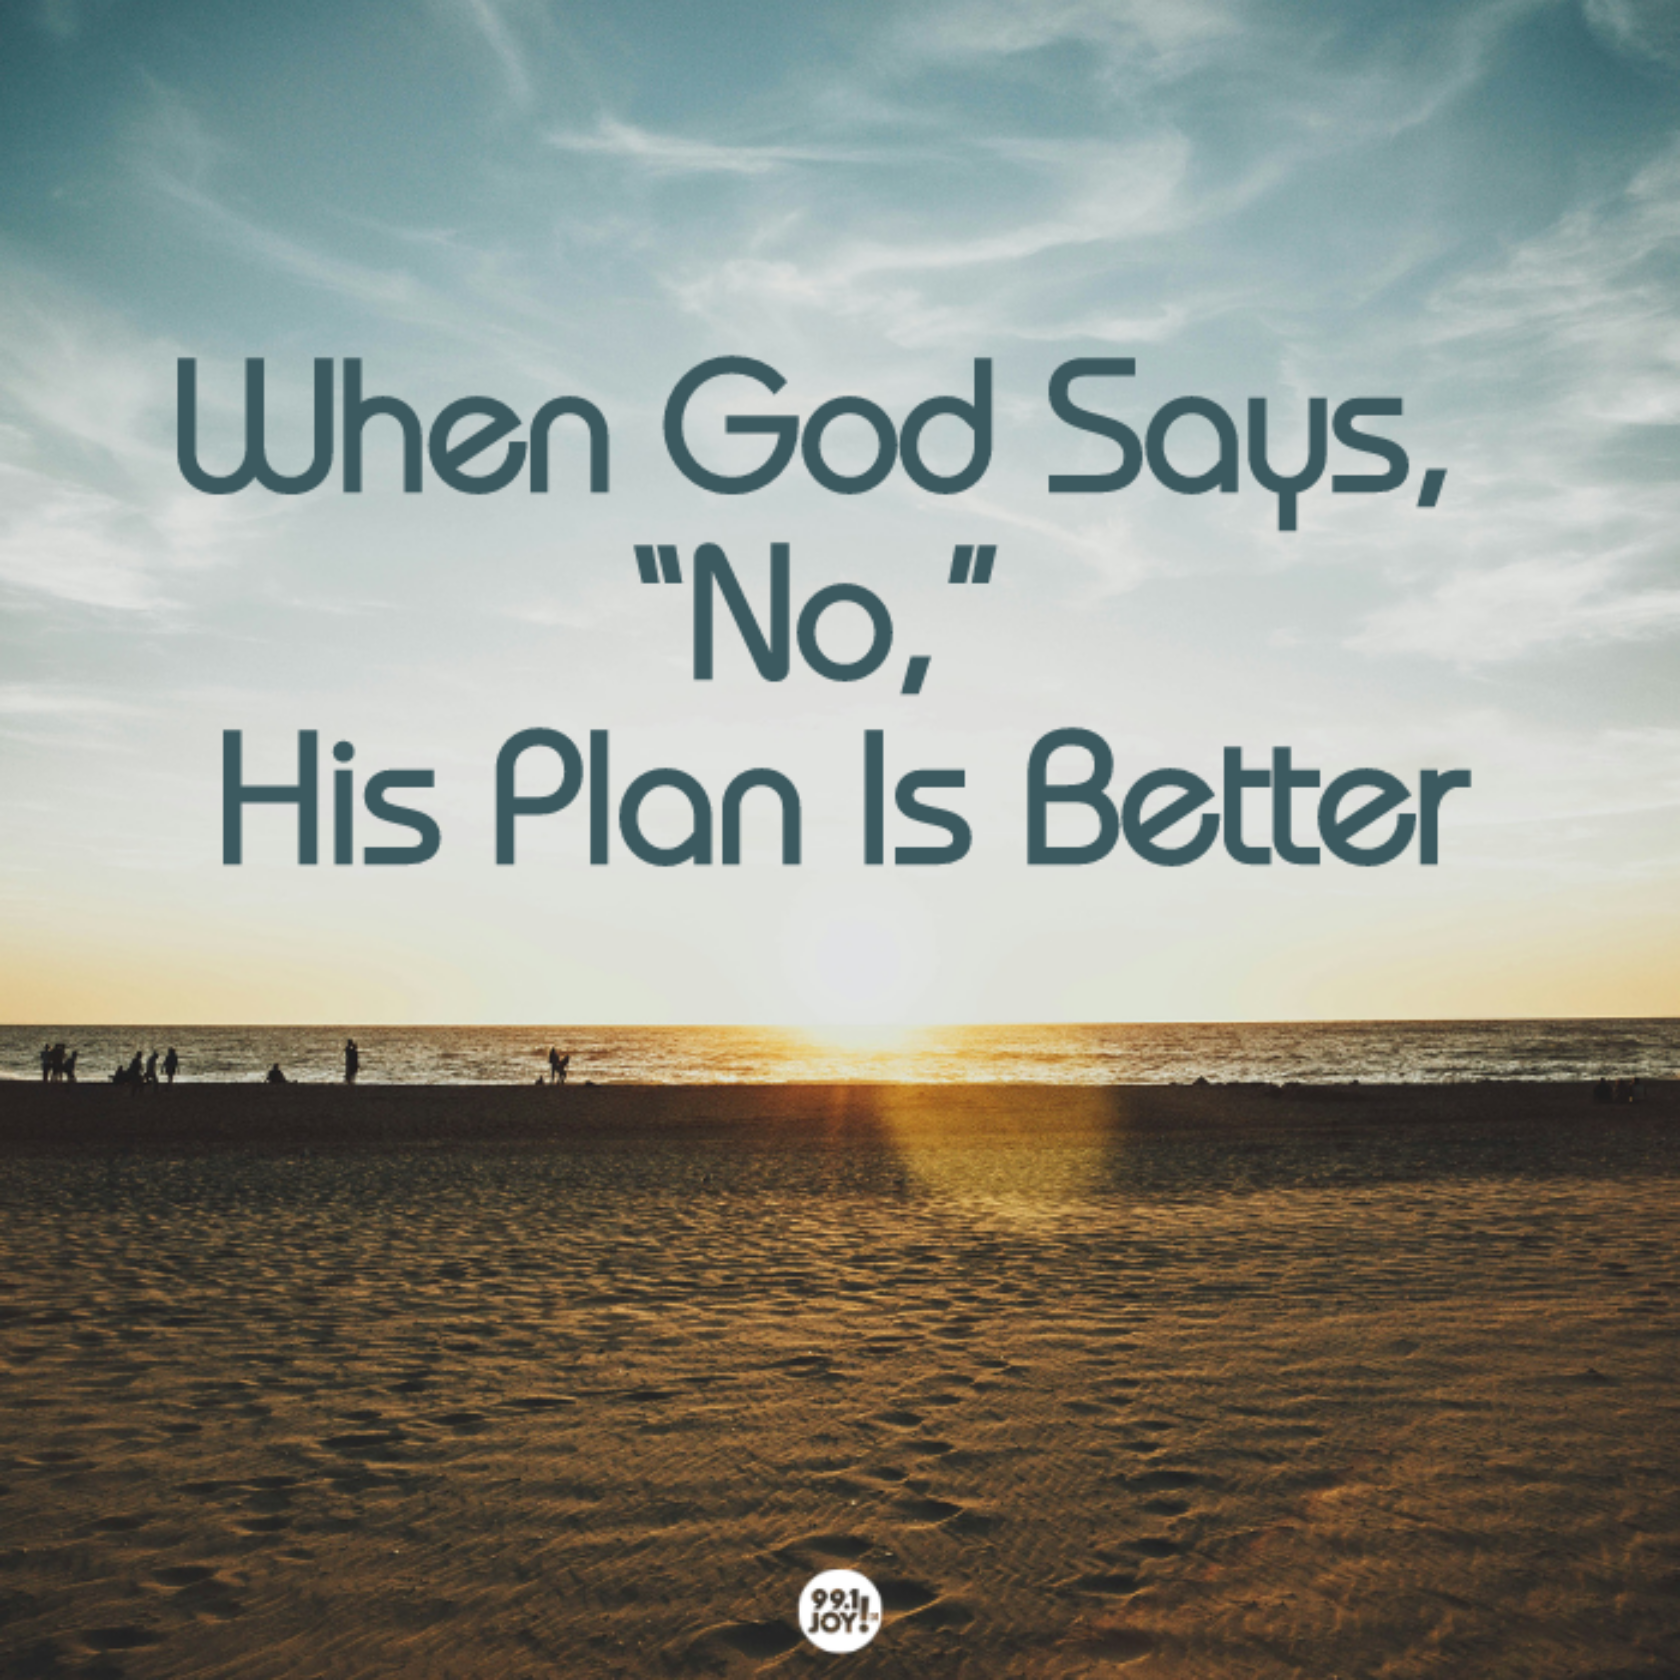 When God Says, “No,” His Plan Is Better